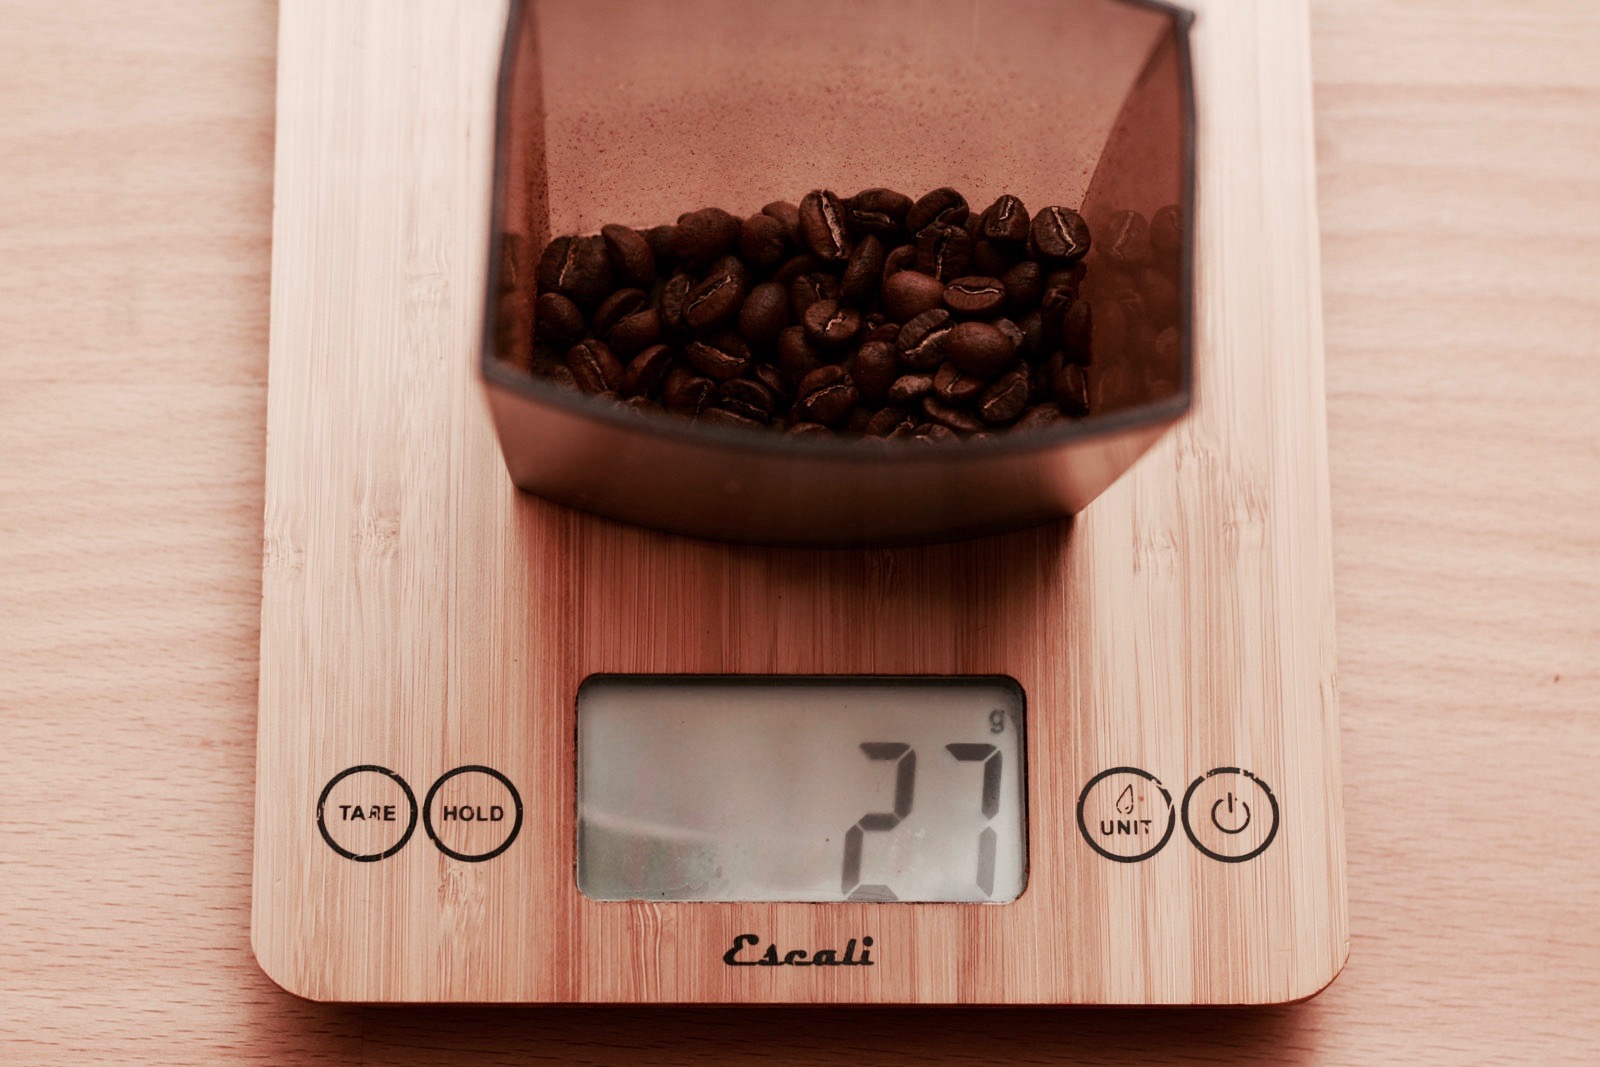 weighing the whole bean coffee to 27g